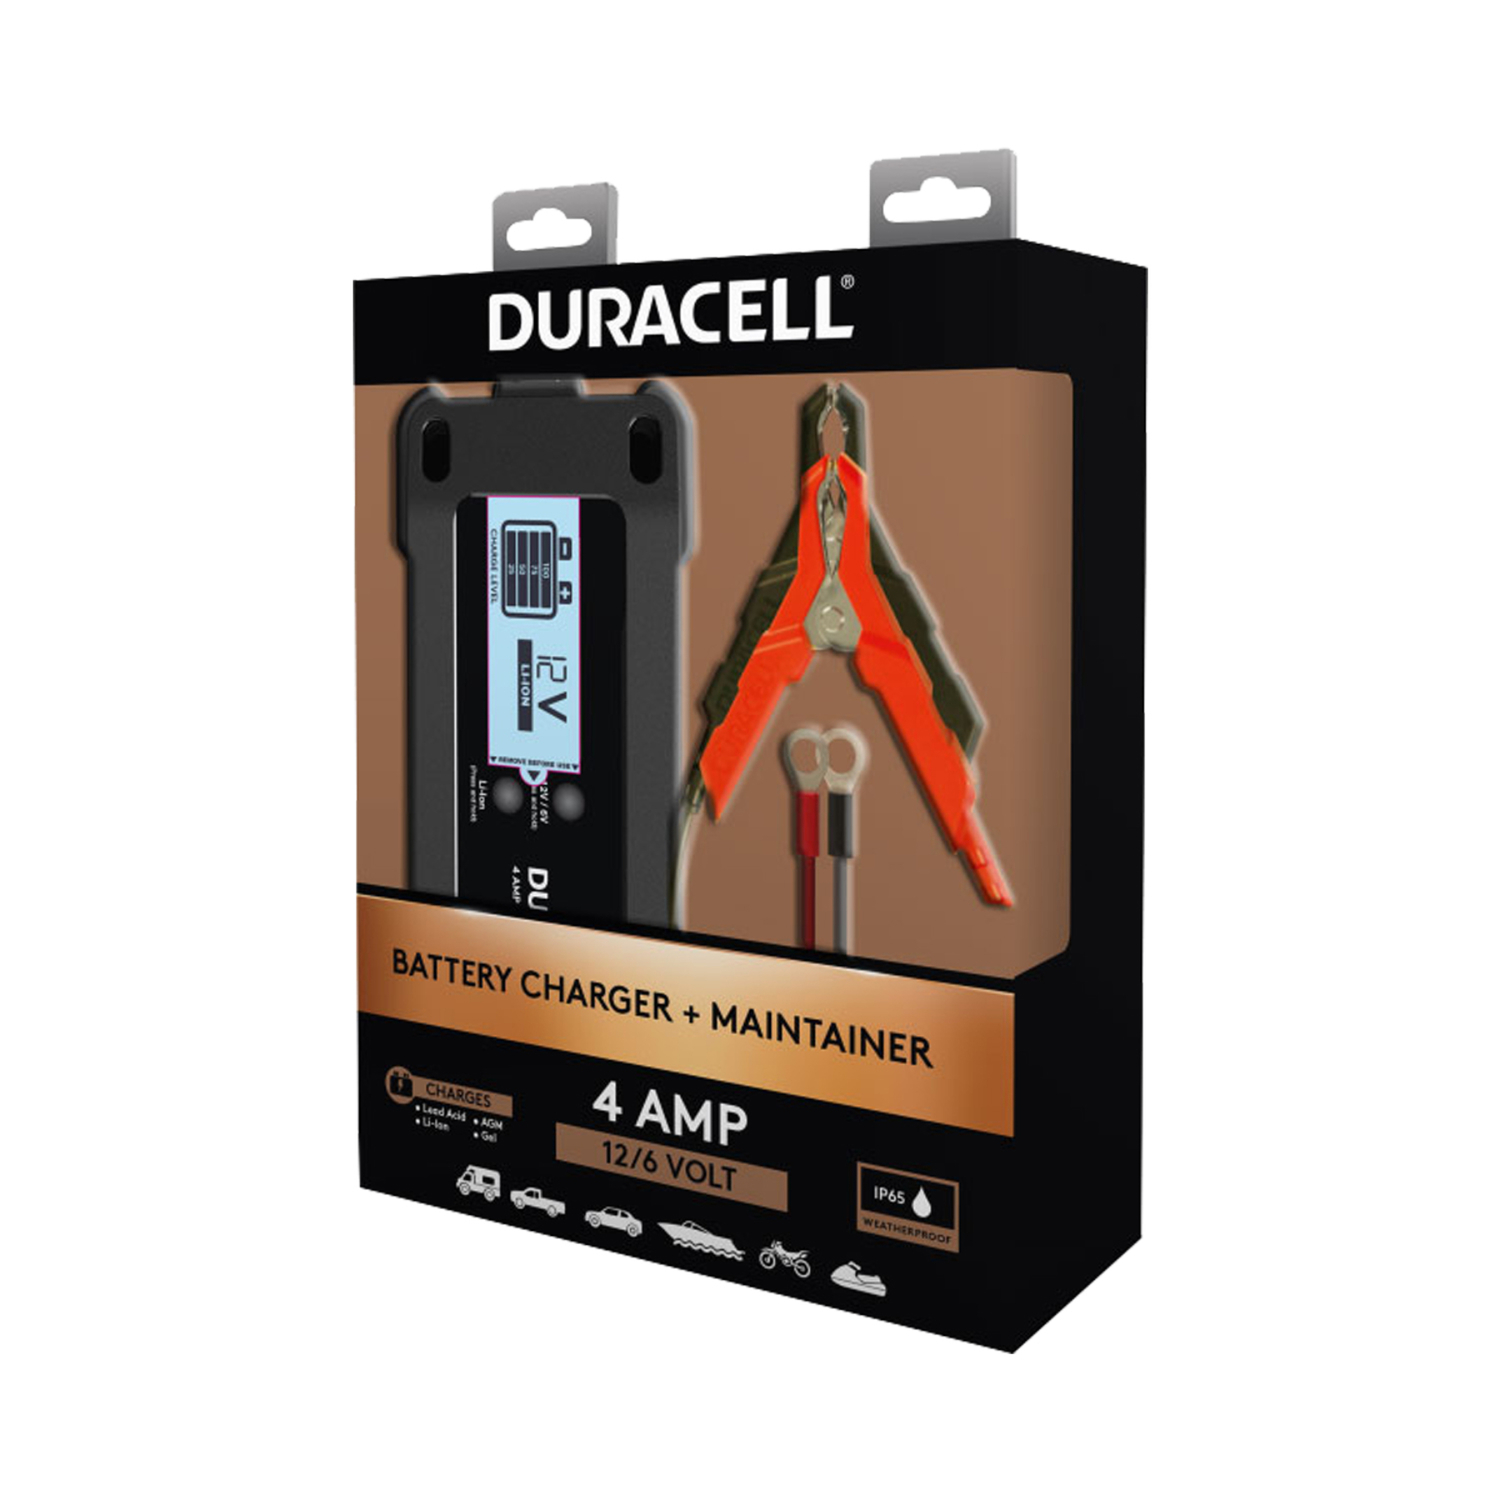 Photos - Battery Charger Duracell Automatic 12 V 4 amps /Maintainer DRMC4A 